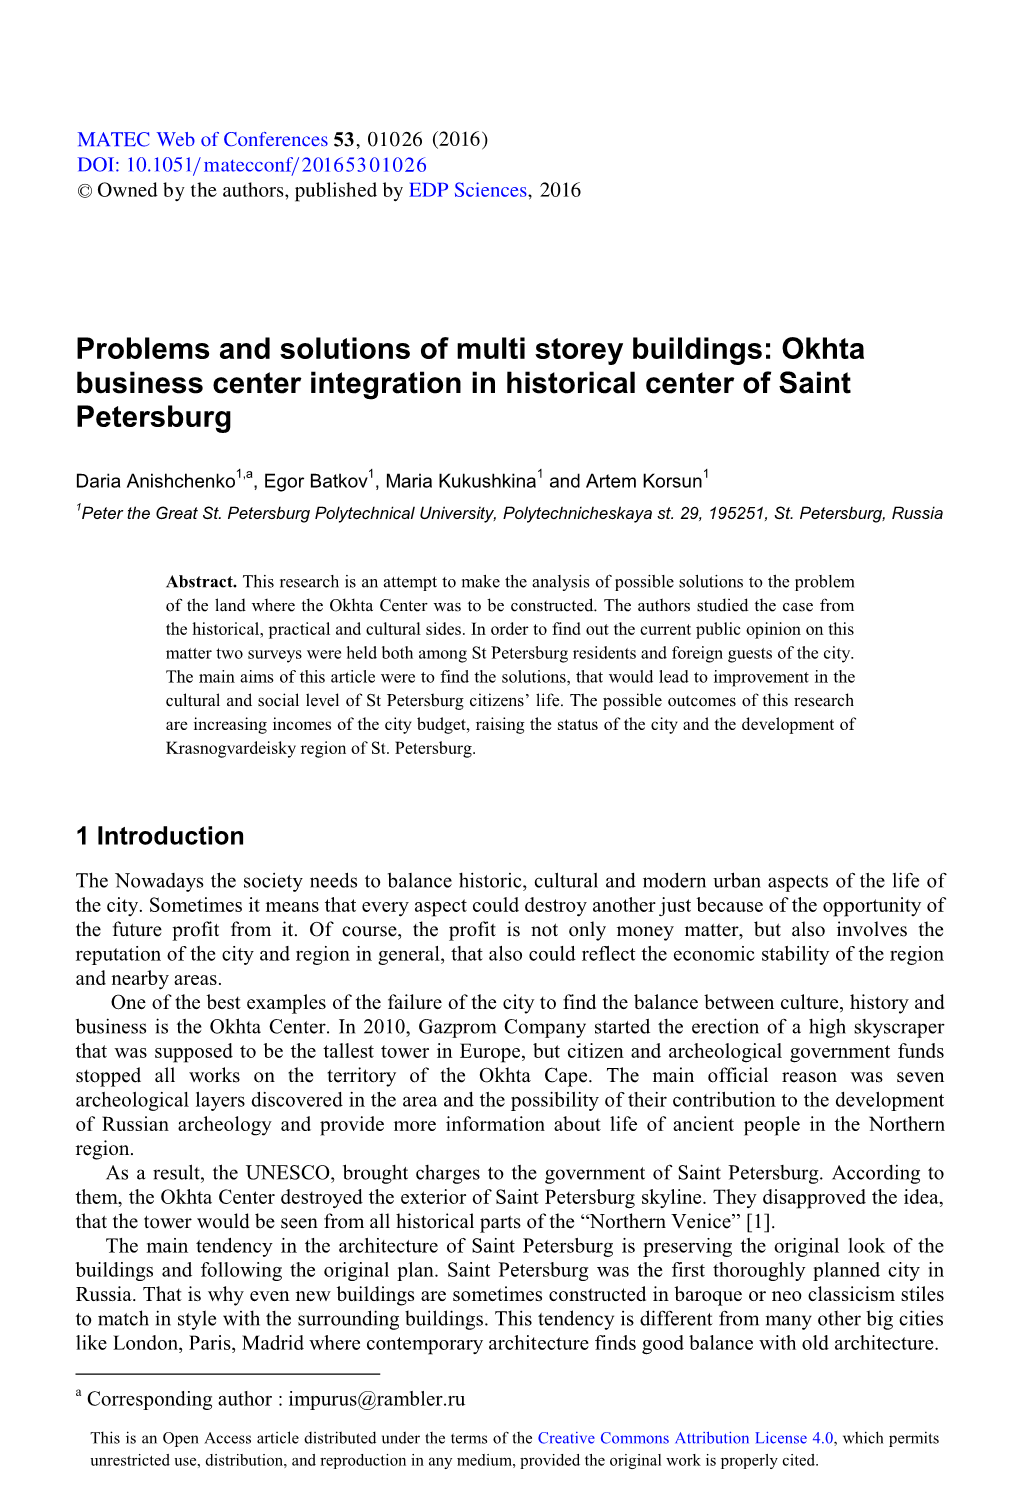 Problems and Solutions of Multi Storey Buildings: Okhta Business Center Integration in Historical Center of Saint Petersburg